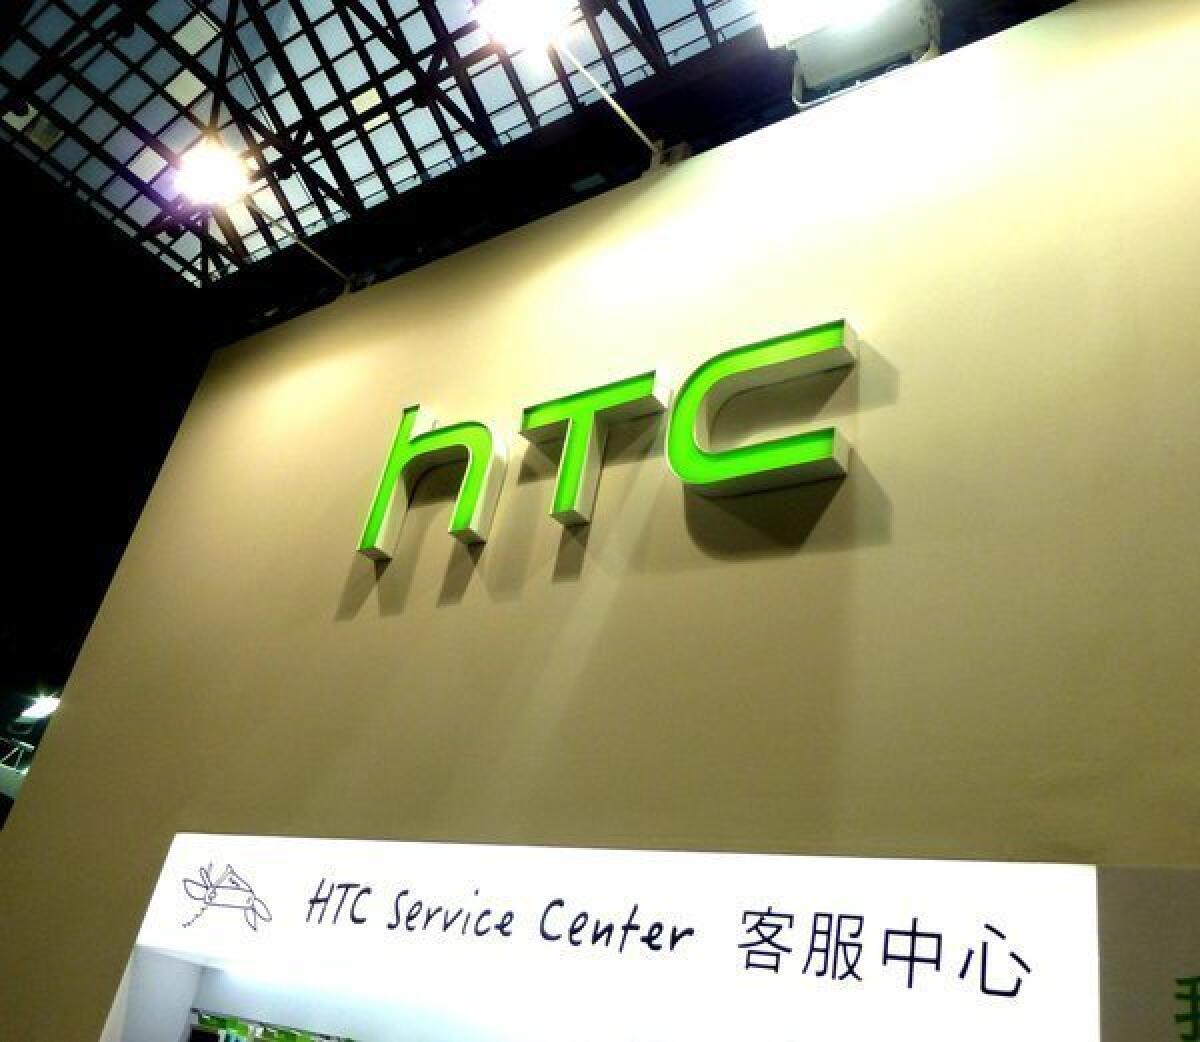 HTC's logo at the 2013 Taipei Computer Application Show in Taiwan.